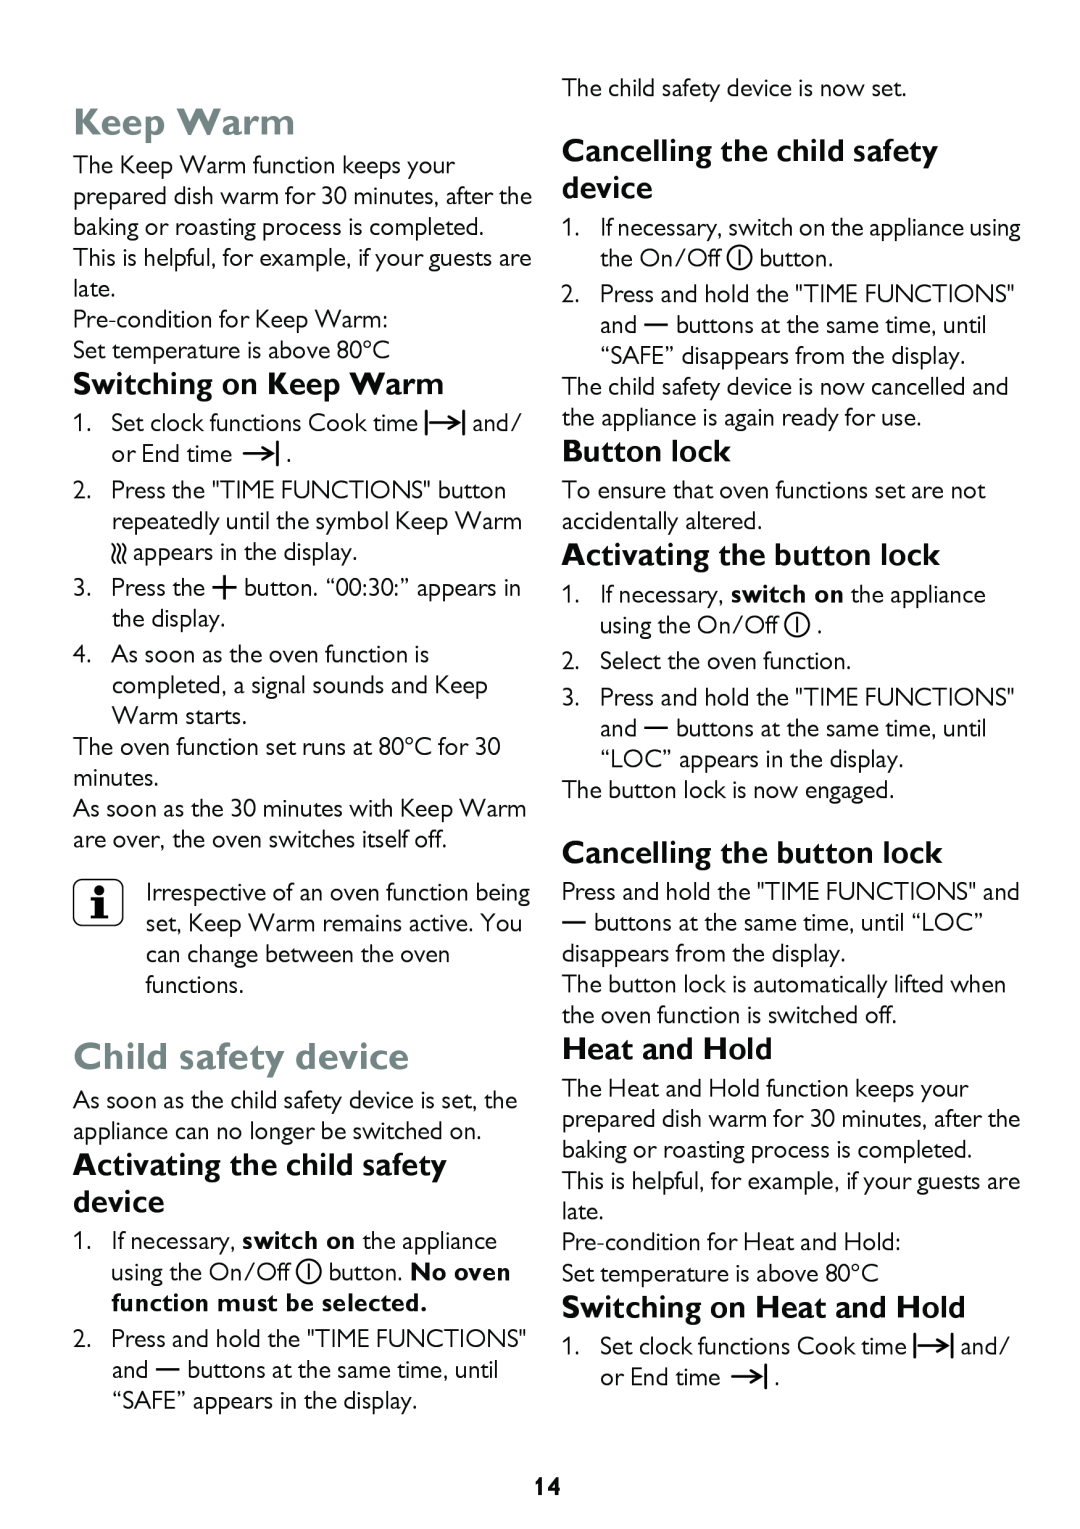 John Lewis JLBIDO913 Child safety device, Switching on Keep Warm, Activating the child safety device, Button lock 